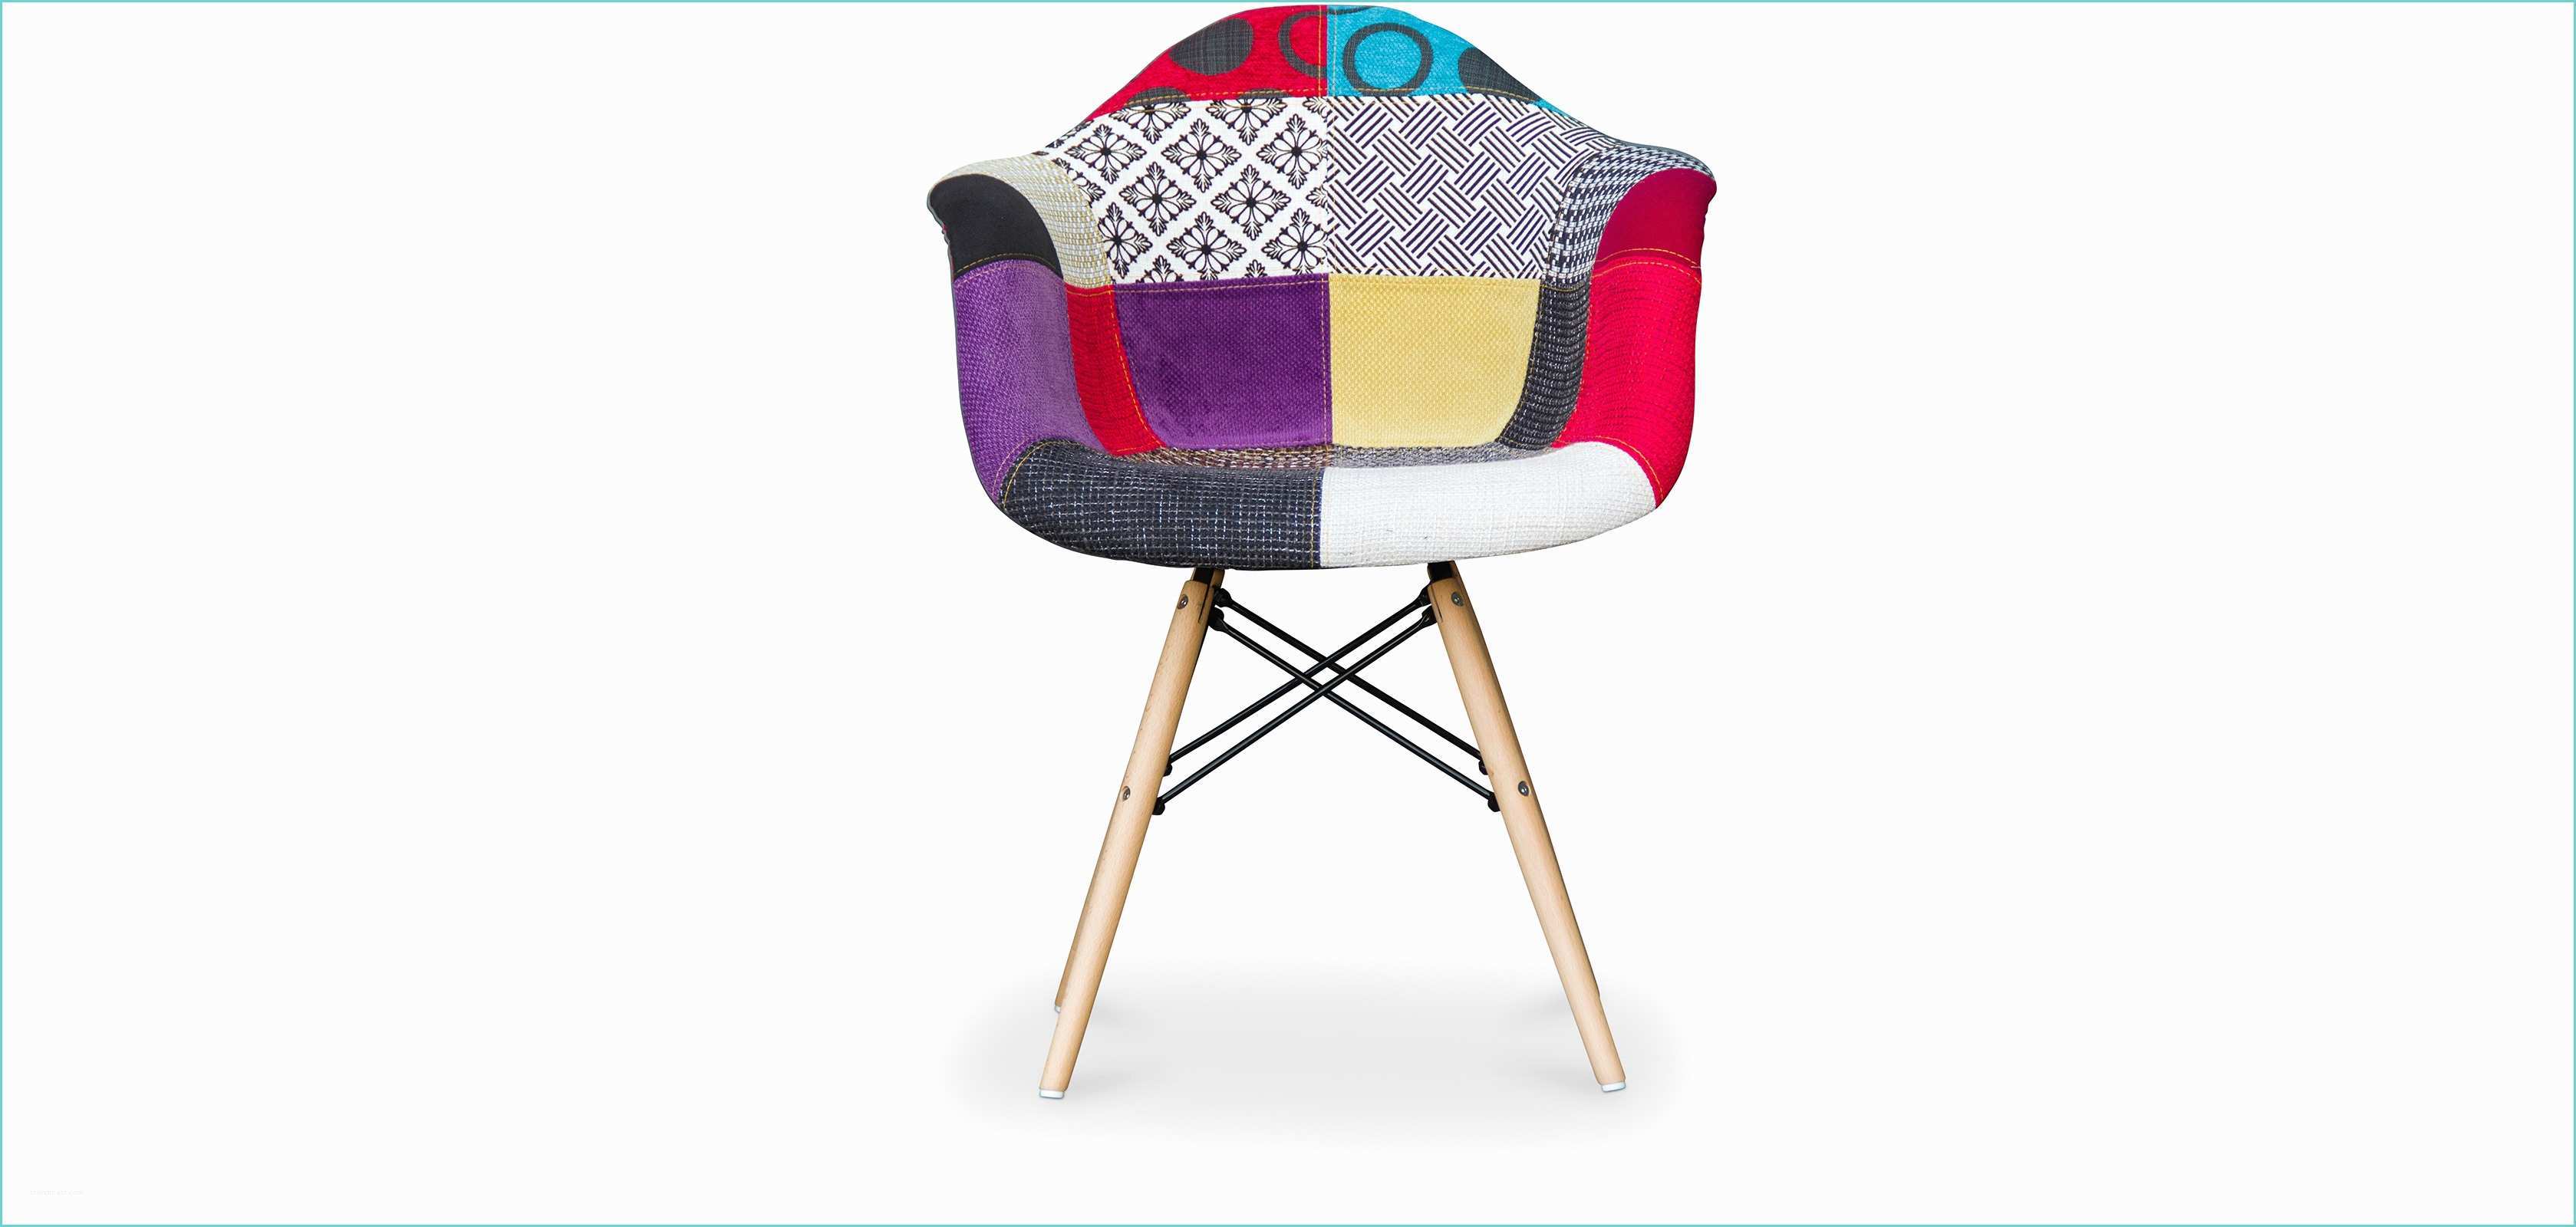 Chaise Charles Eames Pas Cher Chaise Darwin Patchwork Pas Cher